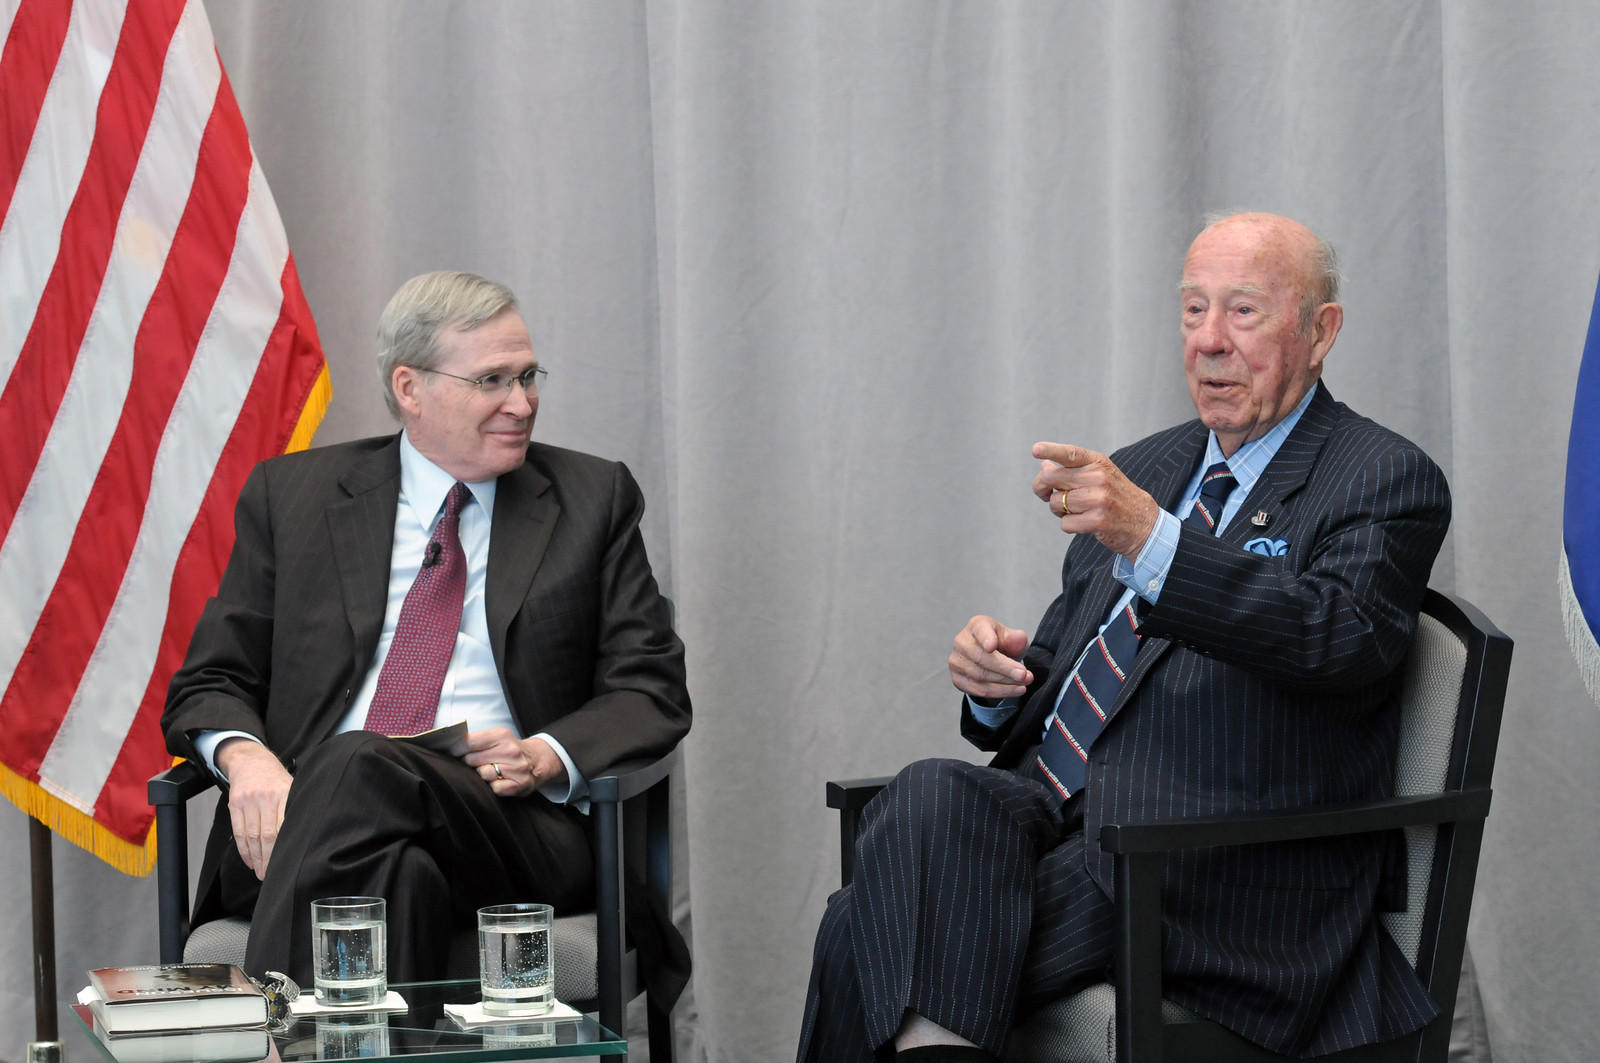 USIP Board Chair Stephen J. Hadley and former Secretary of State George P. Shultz